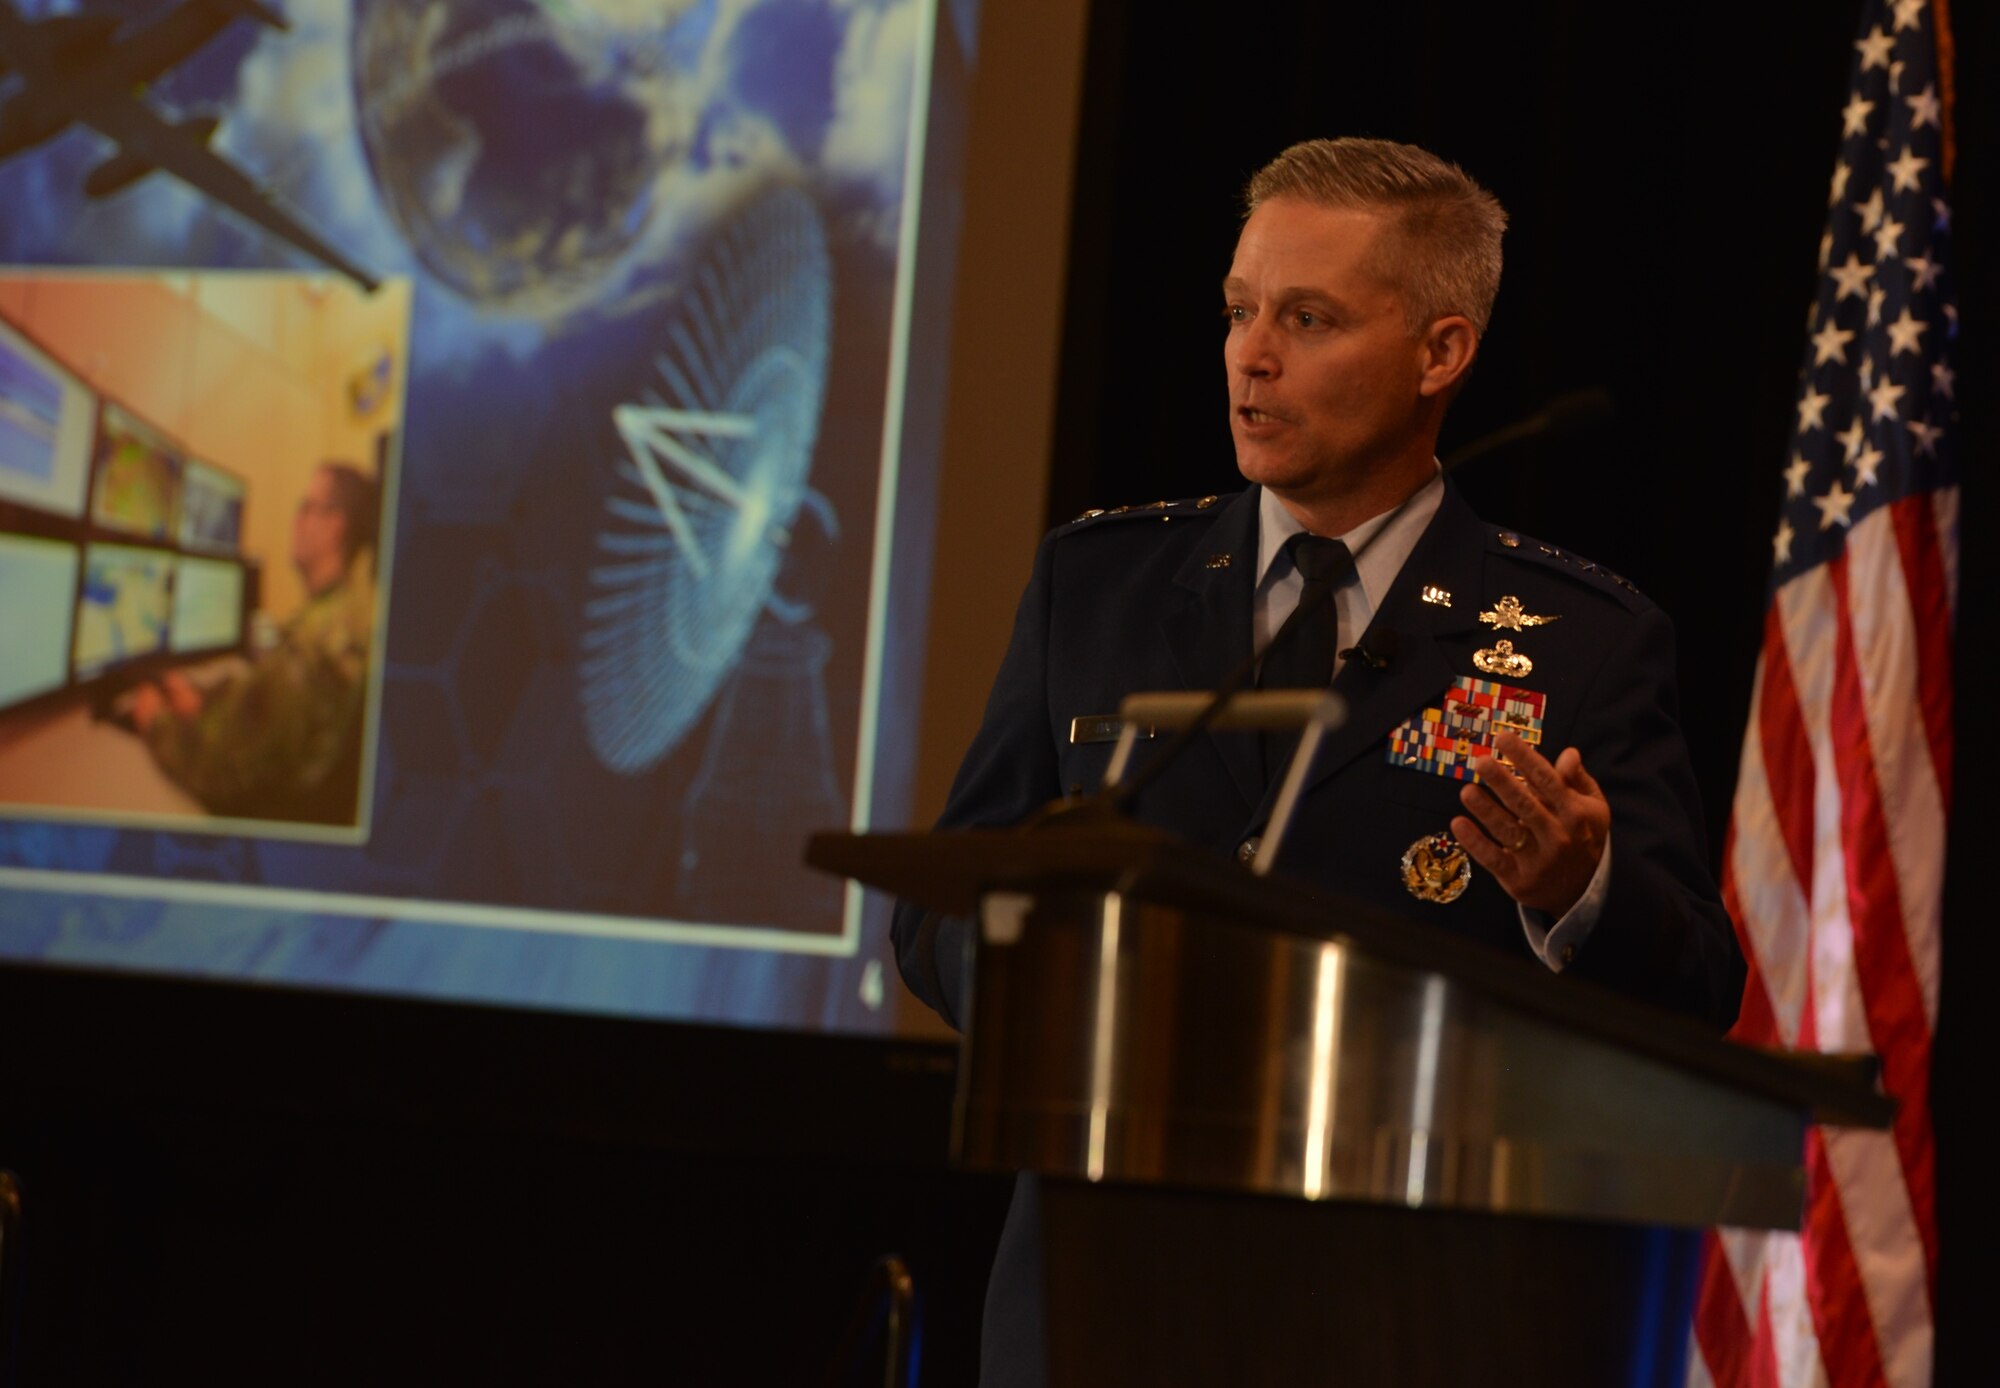 16th Air Force commander speaks at a podium.